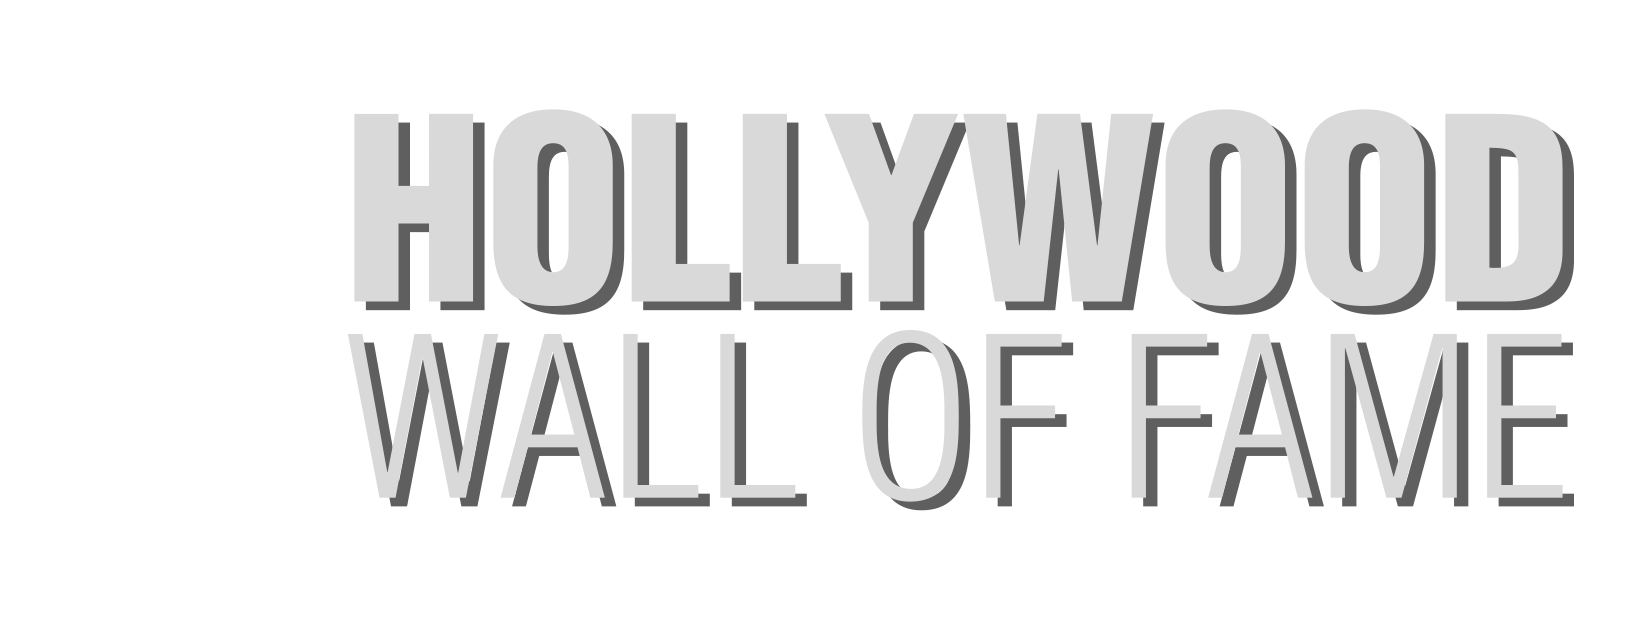 Wall of Fame Logo - The Wall of Fame - Hollywood Wall of Fame